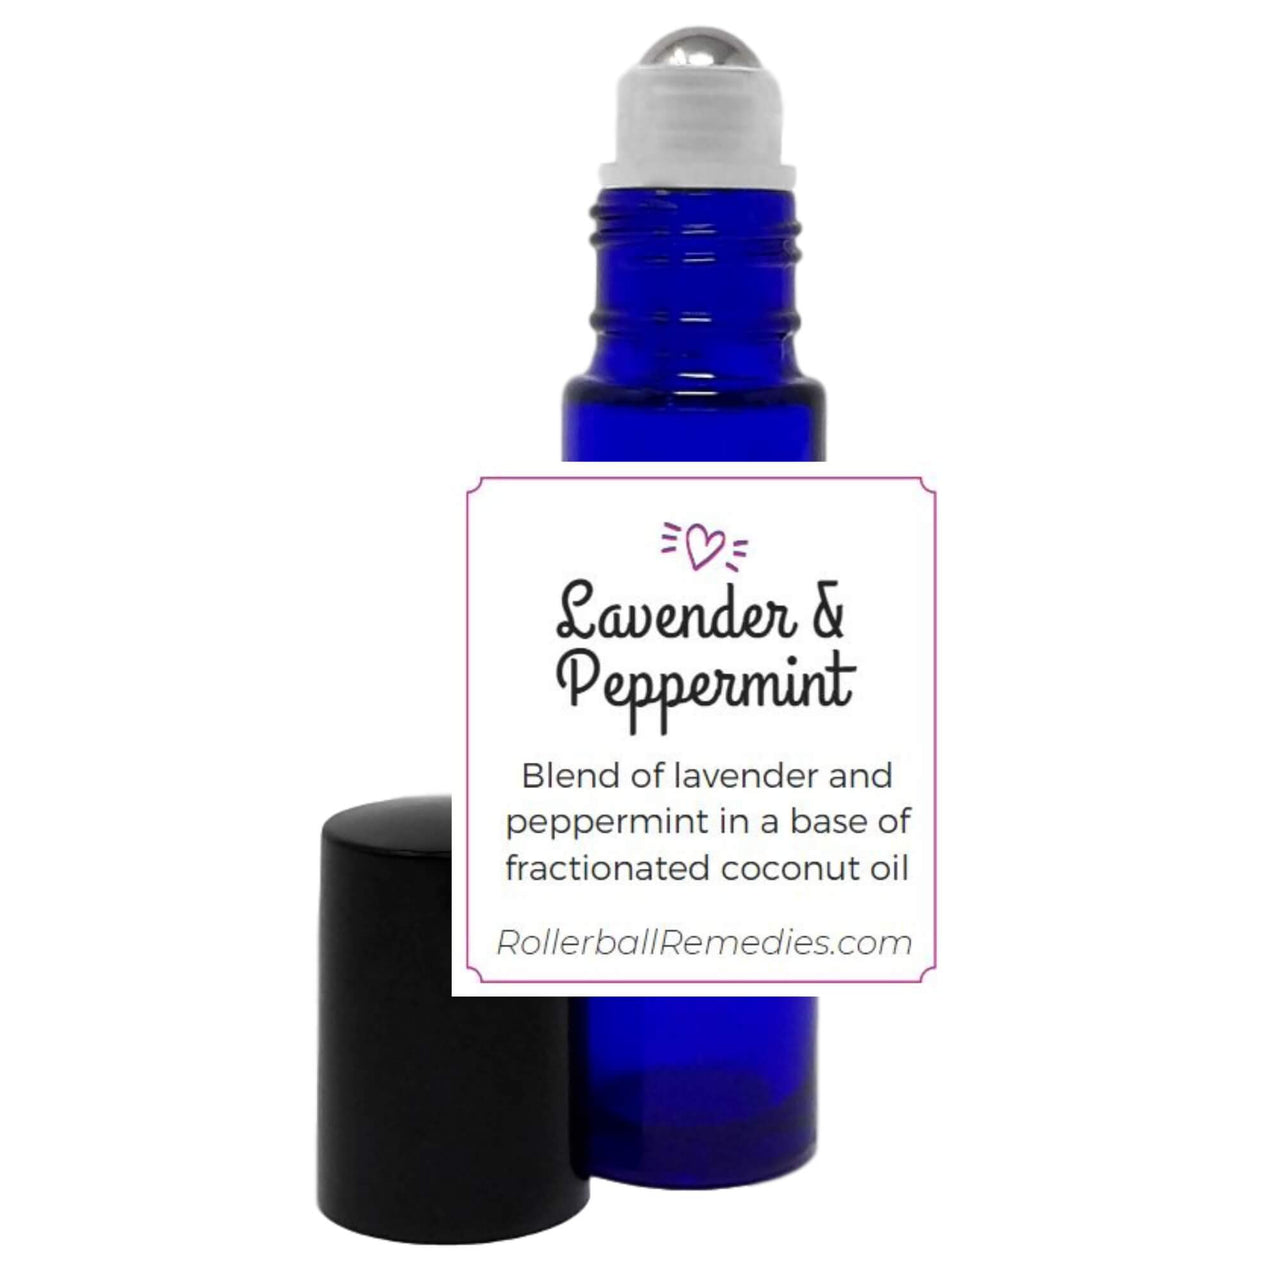 Lavender and Peppermint Essential Oil Blend - 10 ml Roller Bottle Aromatherapy Oils